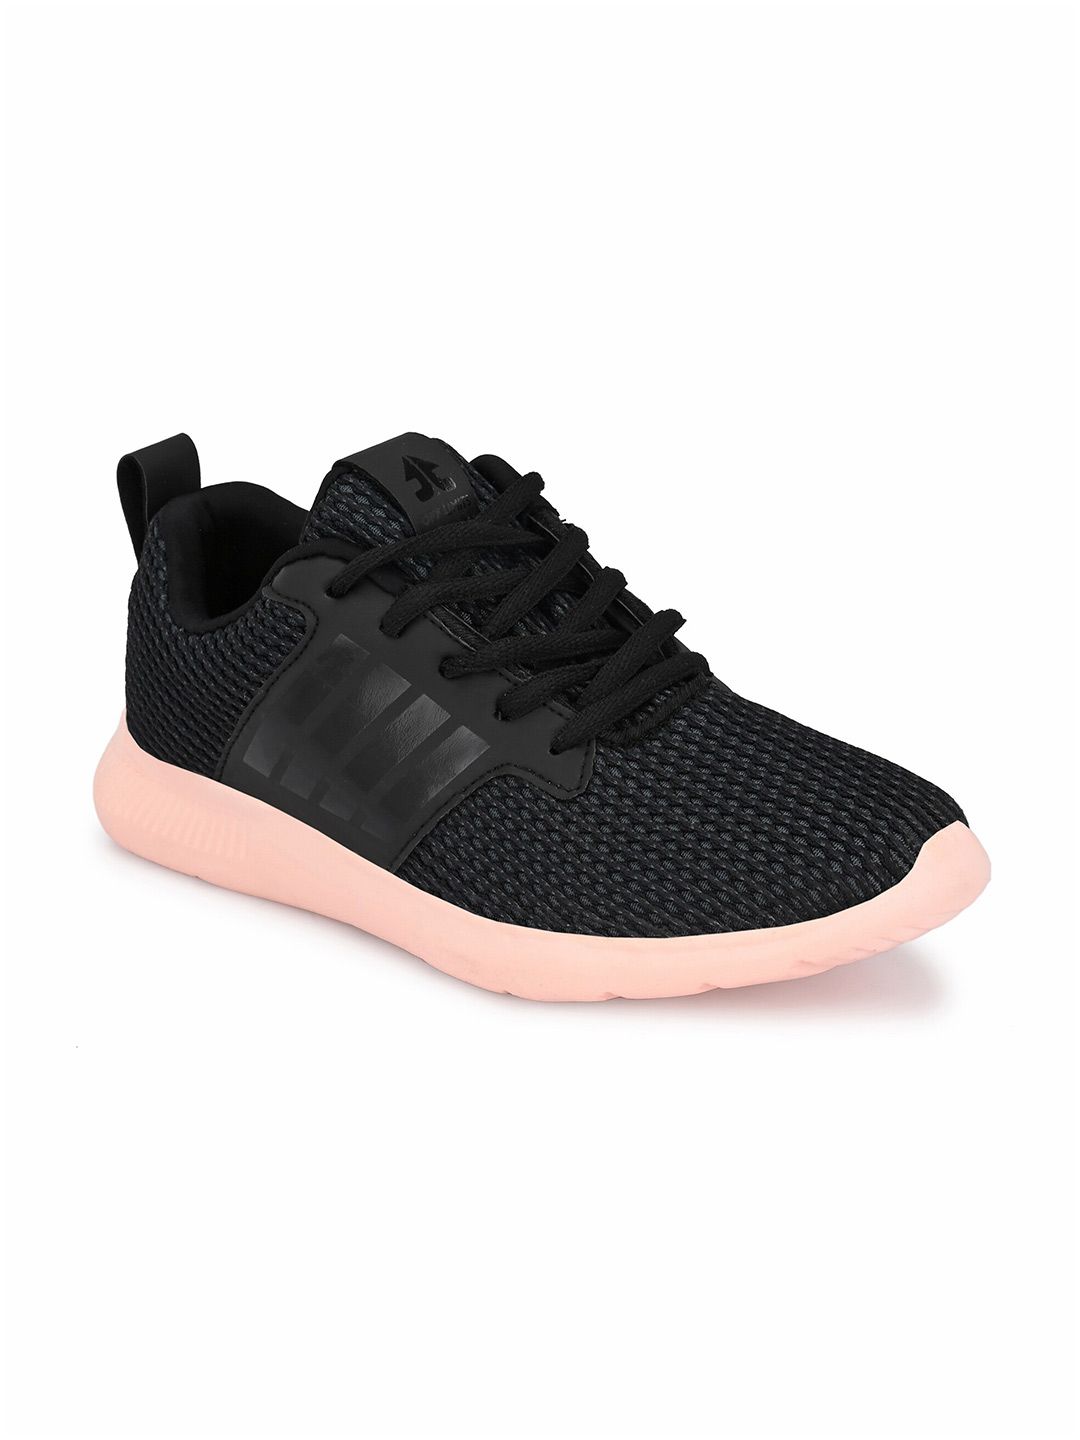 OFF LIMITS Women Black & Peach-Coloured Mesh Training or Gym Non-Marking Shoes Price in India